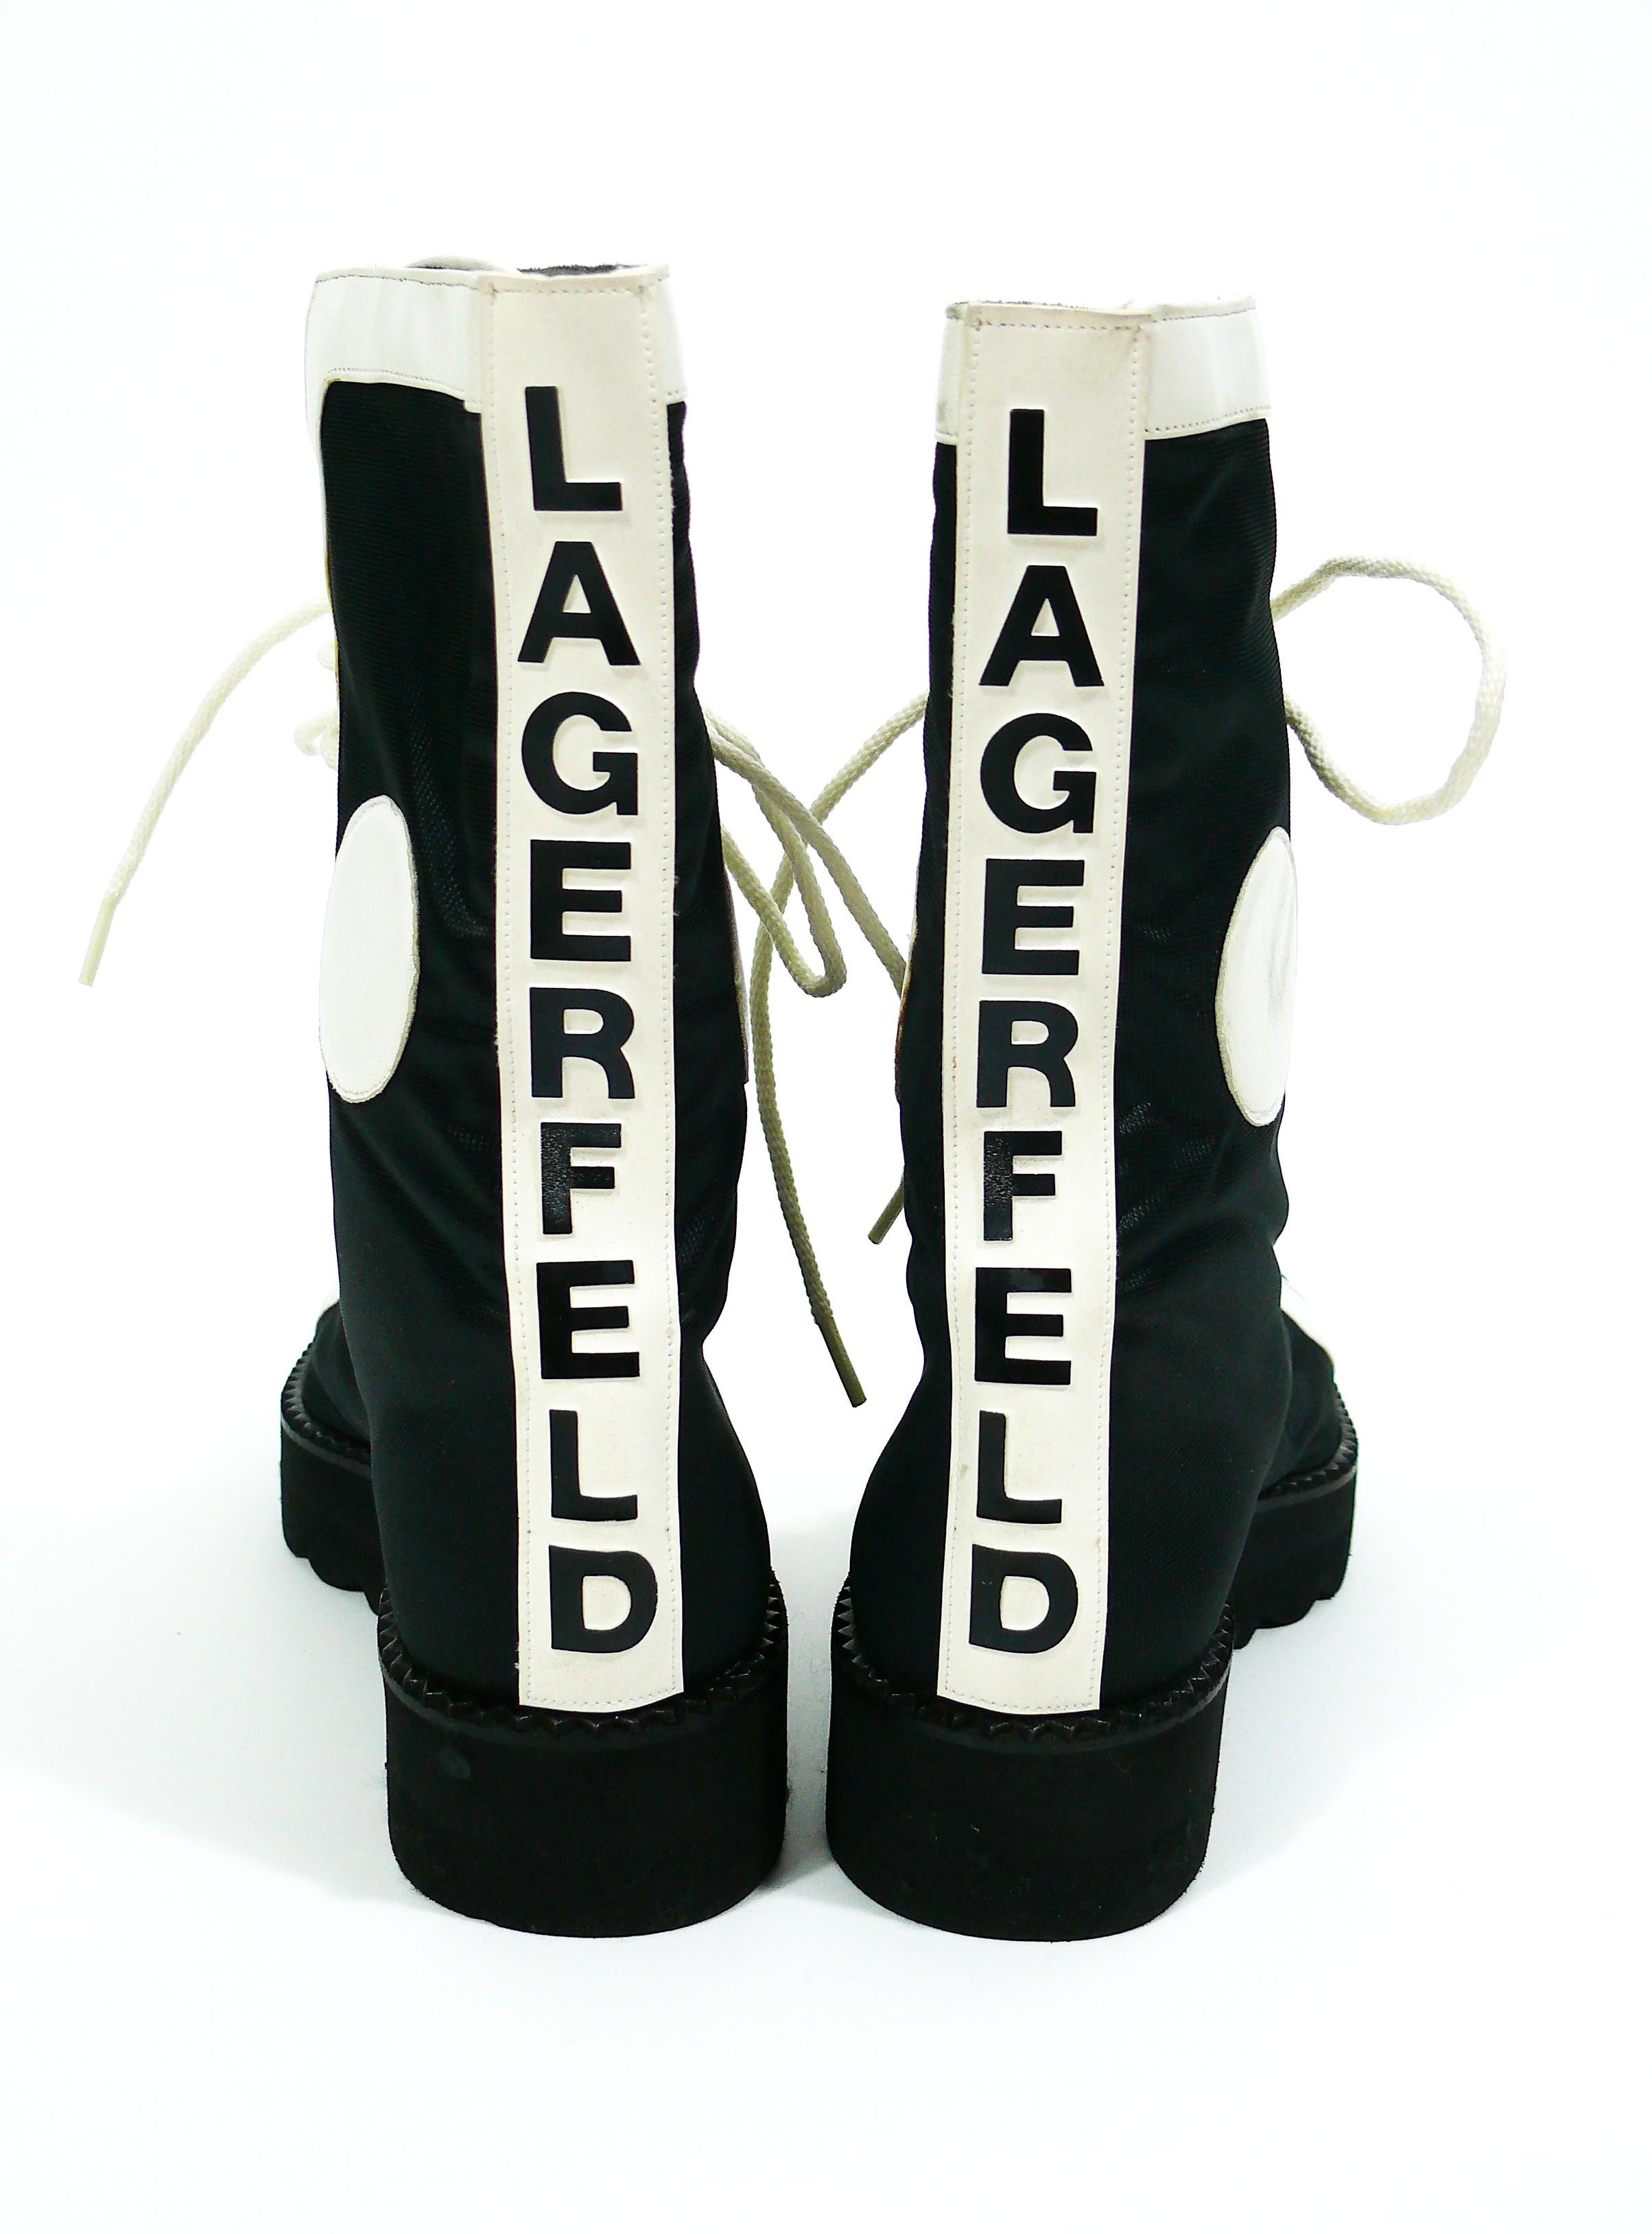 Women's Karl Lagerfeld Vintage Black White Lace Up Combat Boots